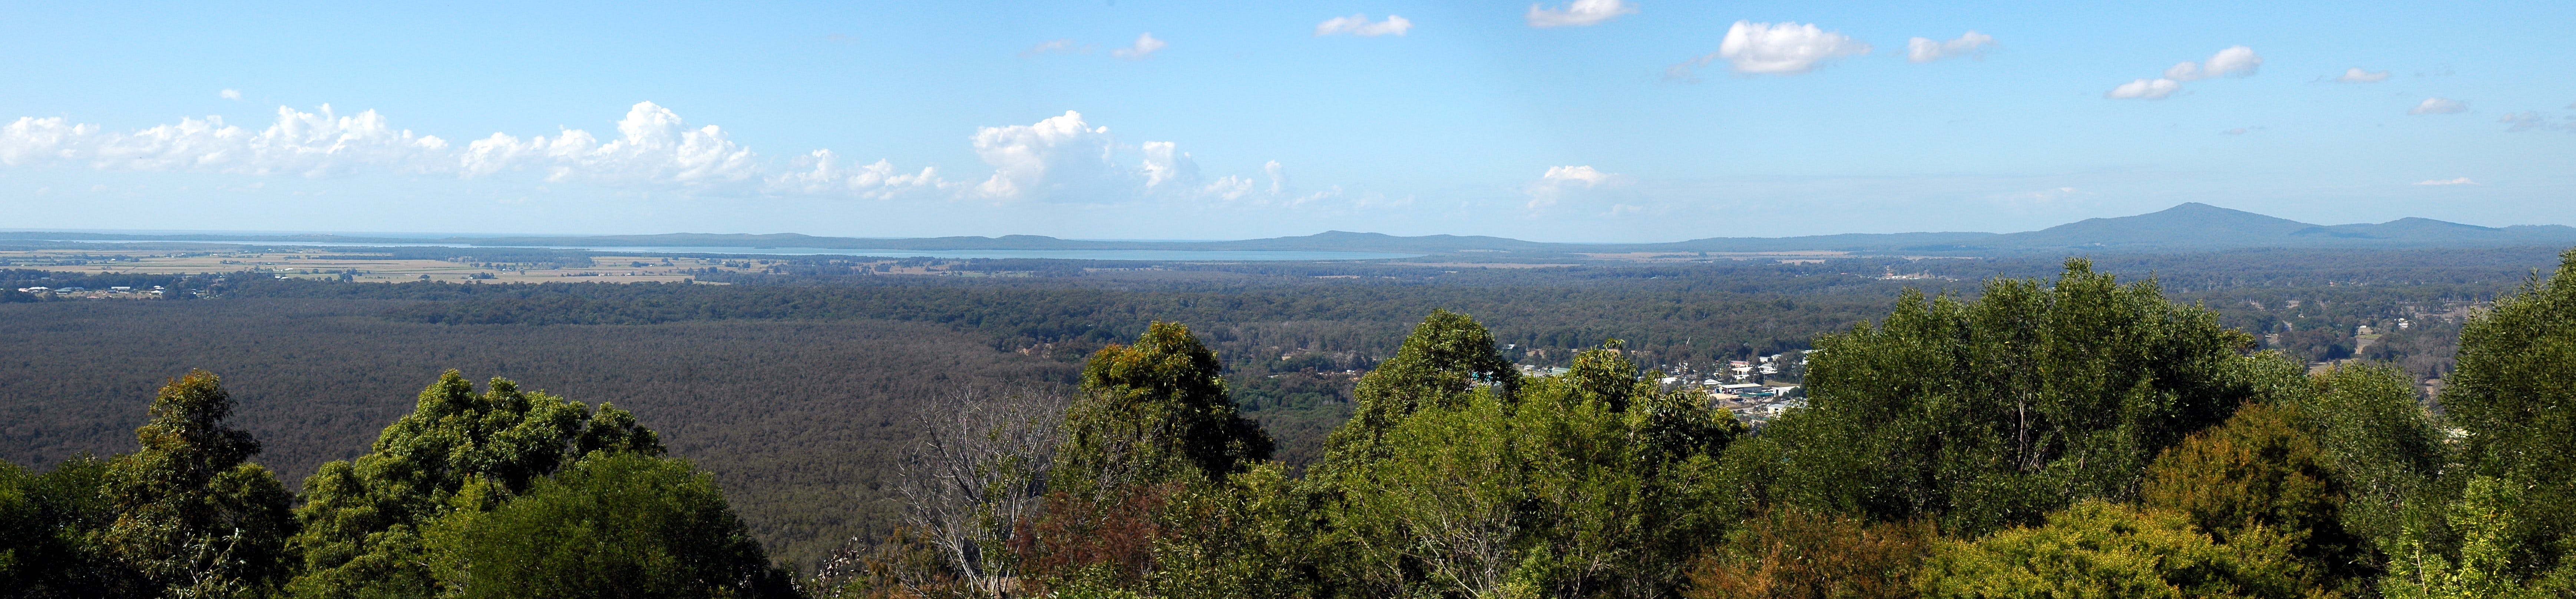 Maclean Lookout - Tourism Cairns